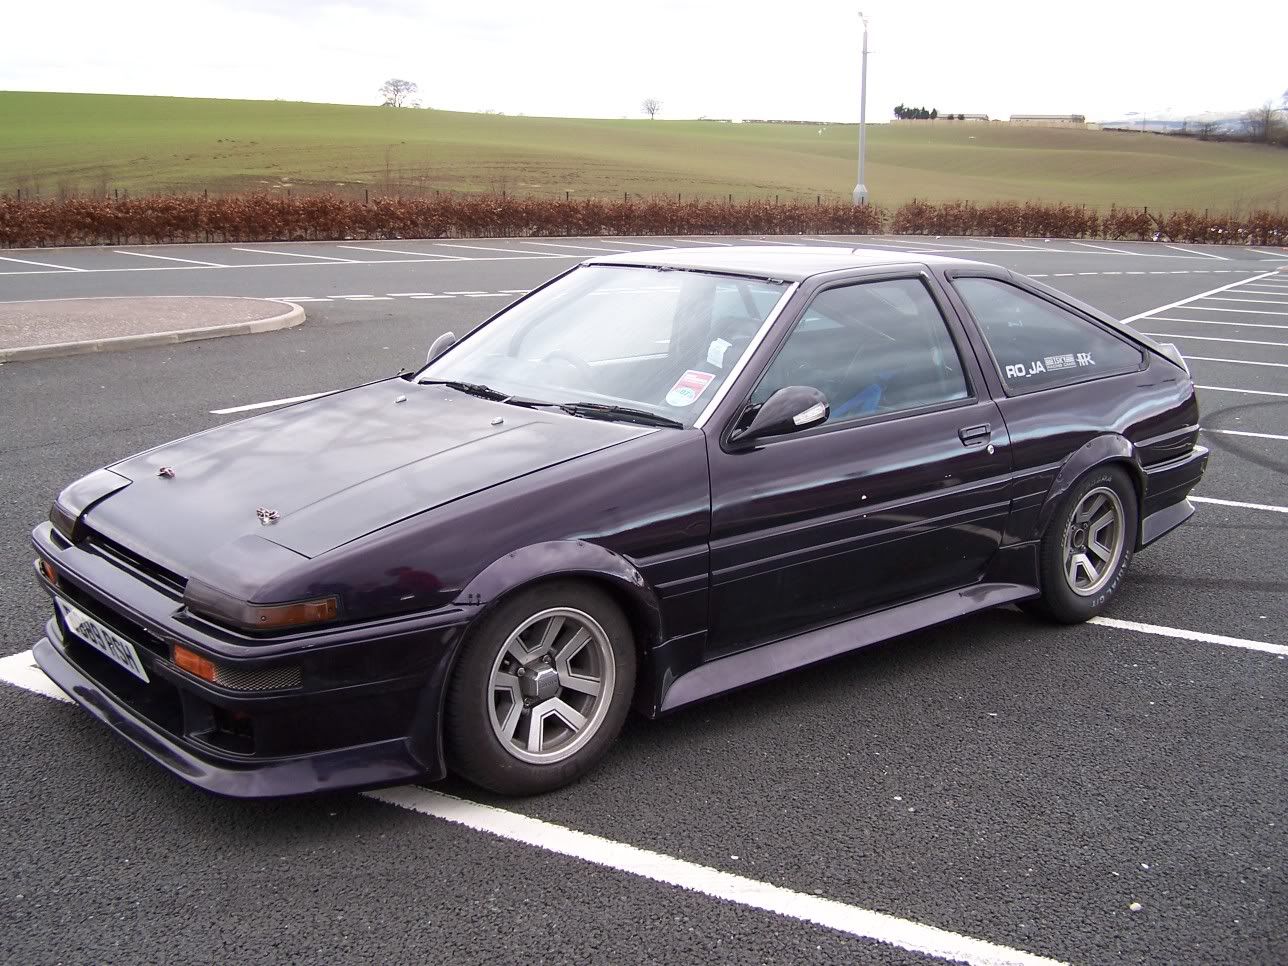 [Image: AEU86 AE86 - what kit is this]